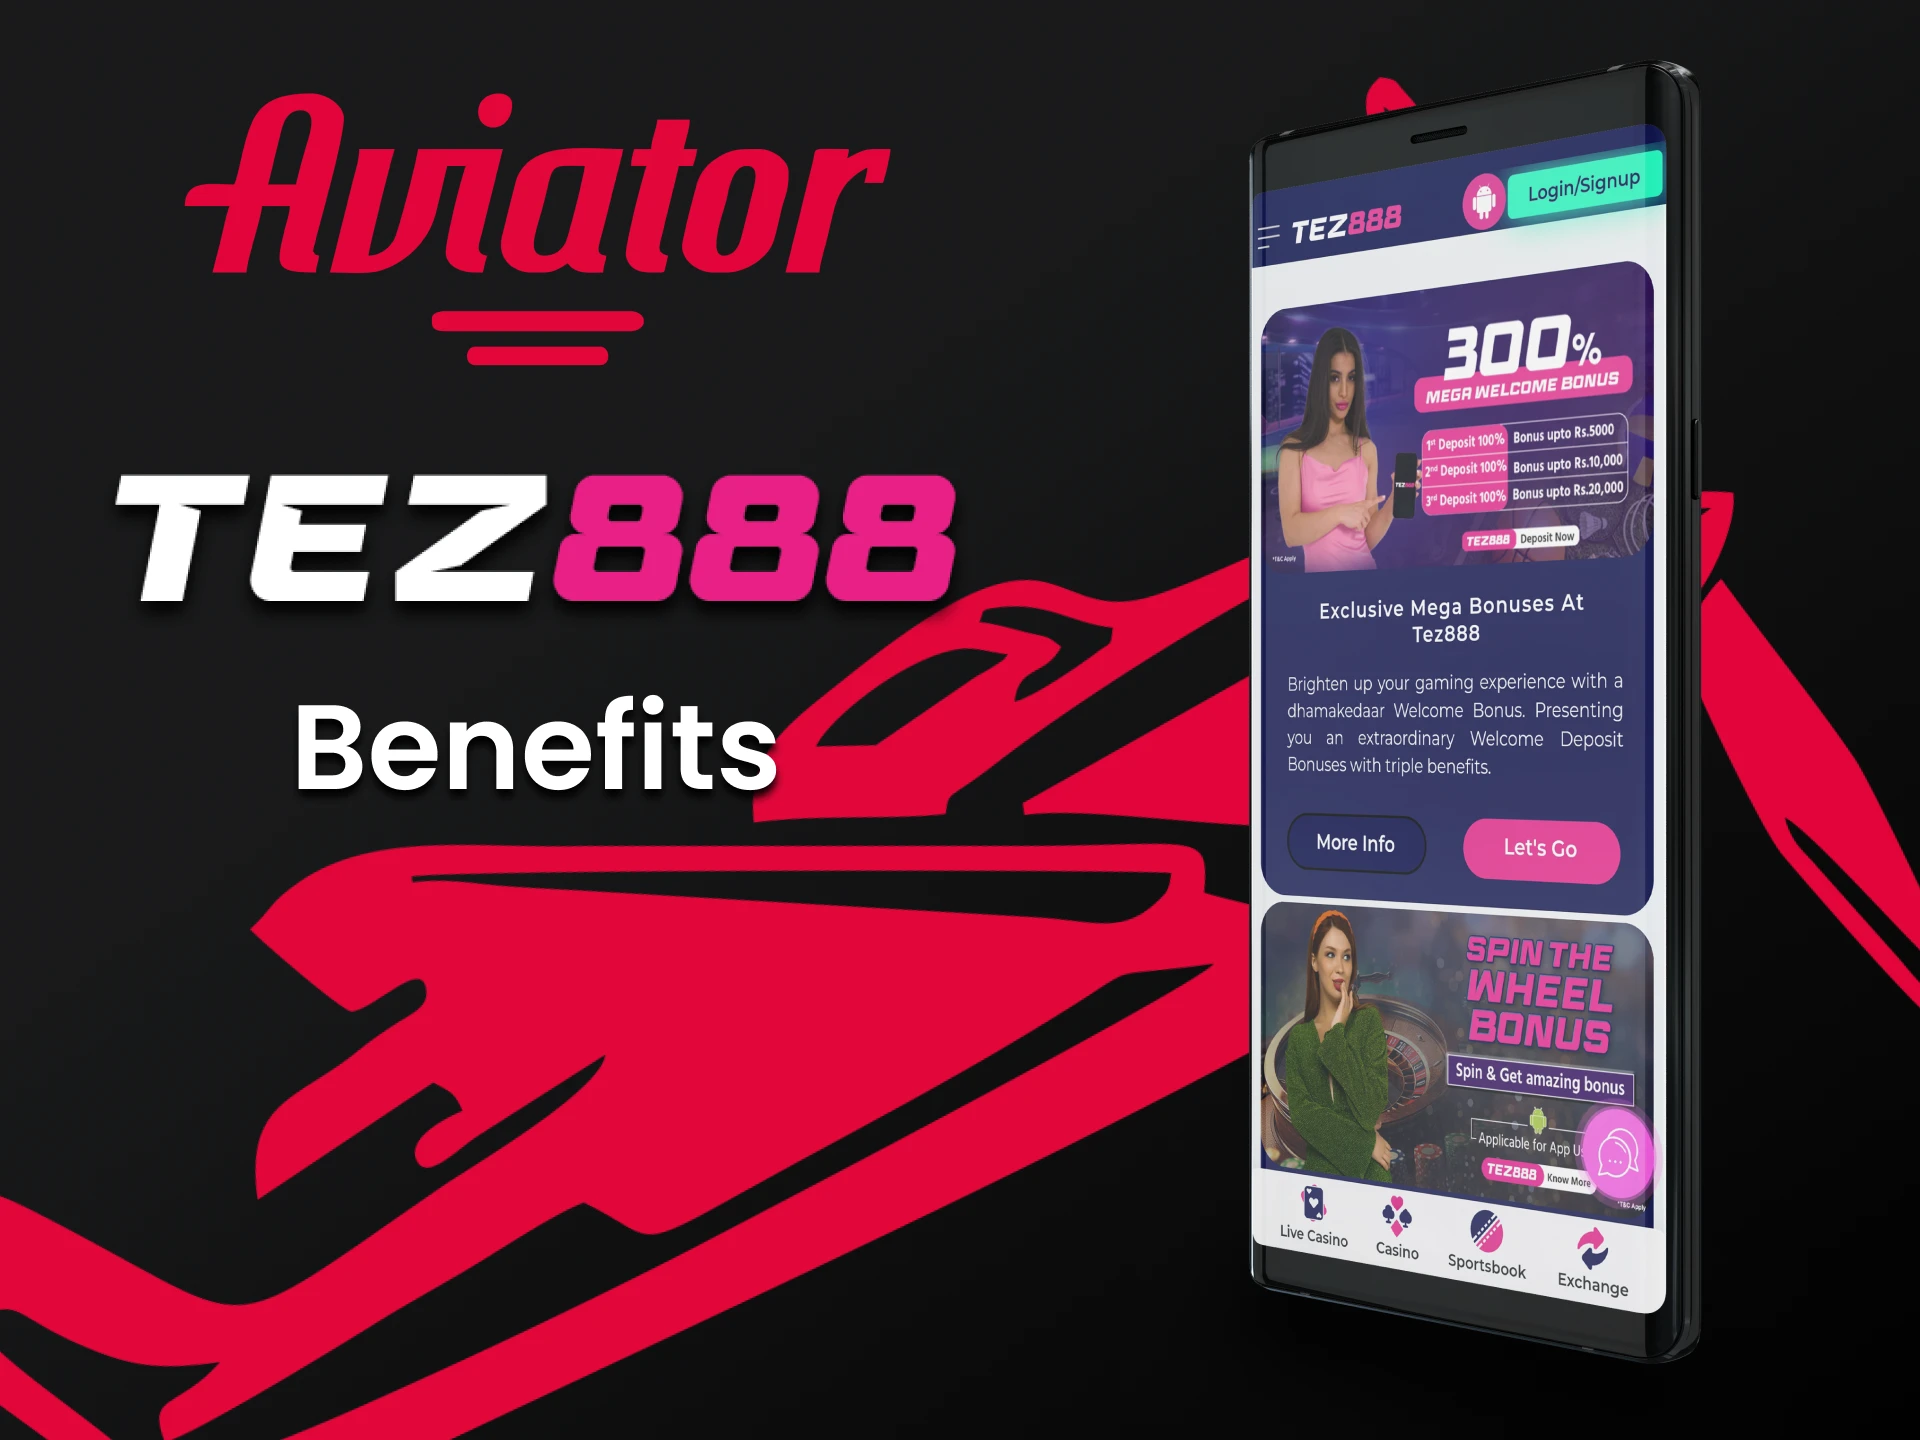 We will tell you about the benefits Tez888 applications for the game Aviator.